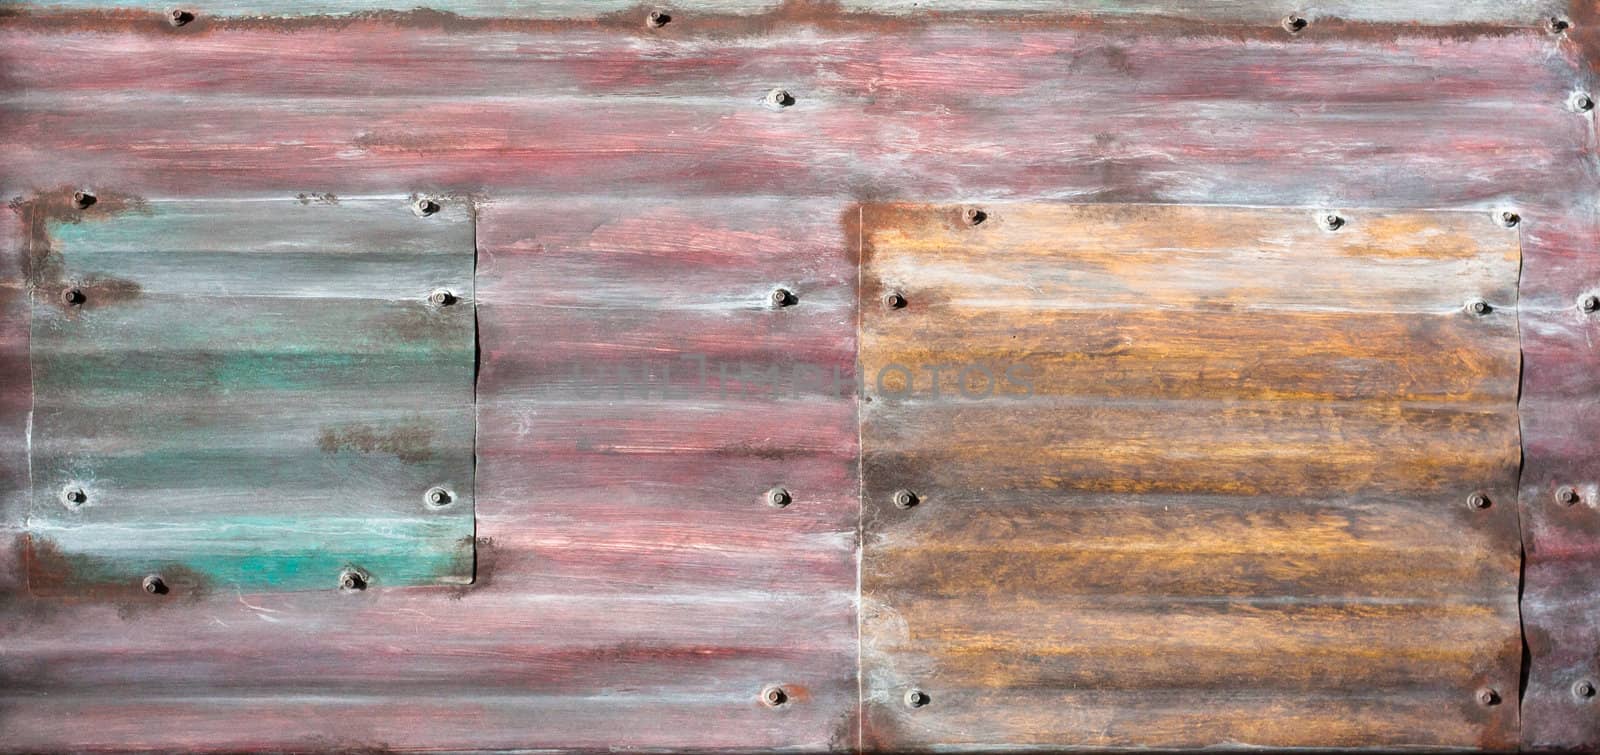 Colorful corrugated metal surface as a background image